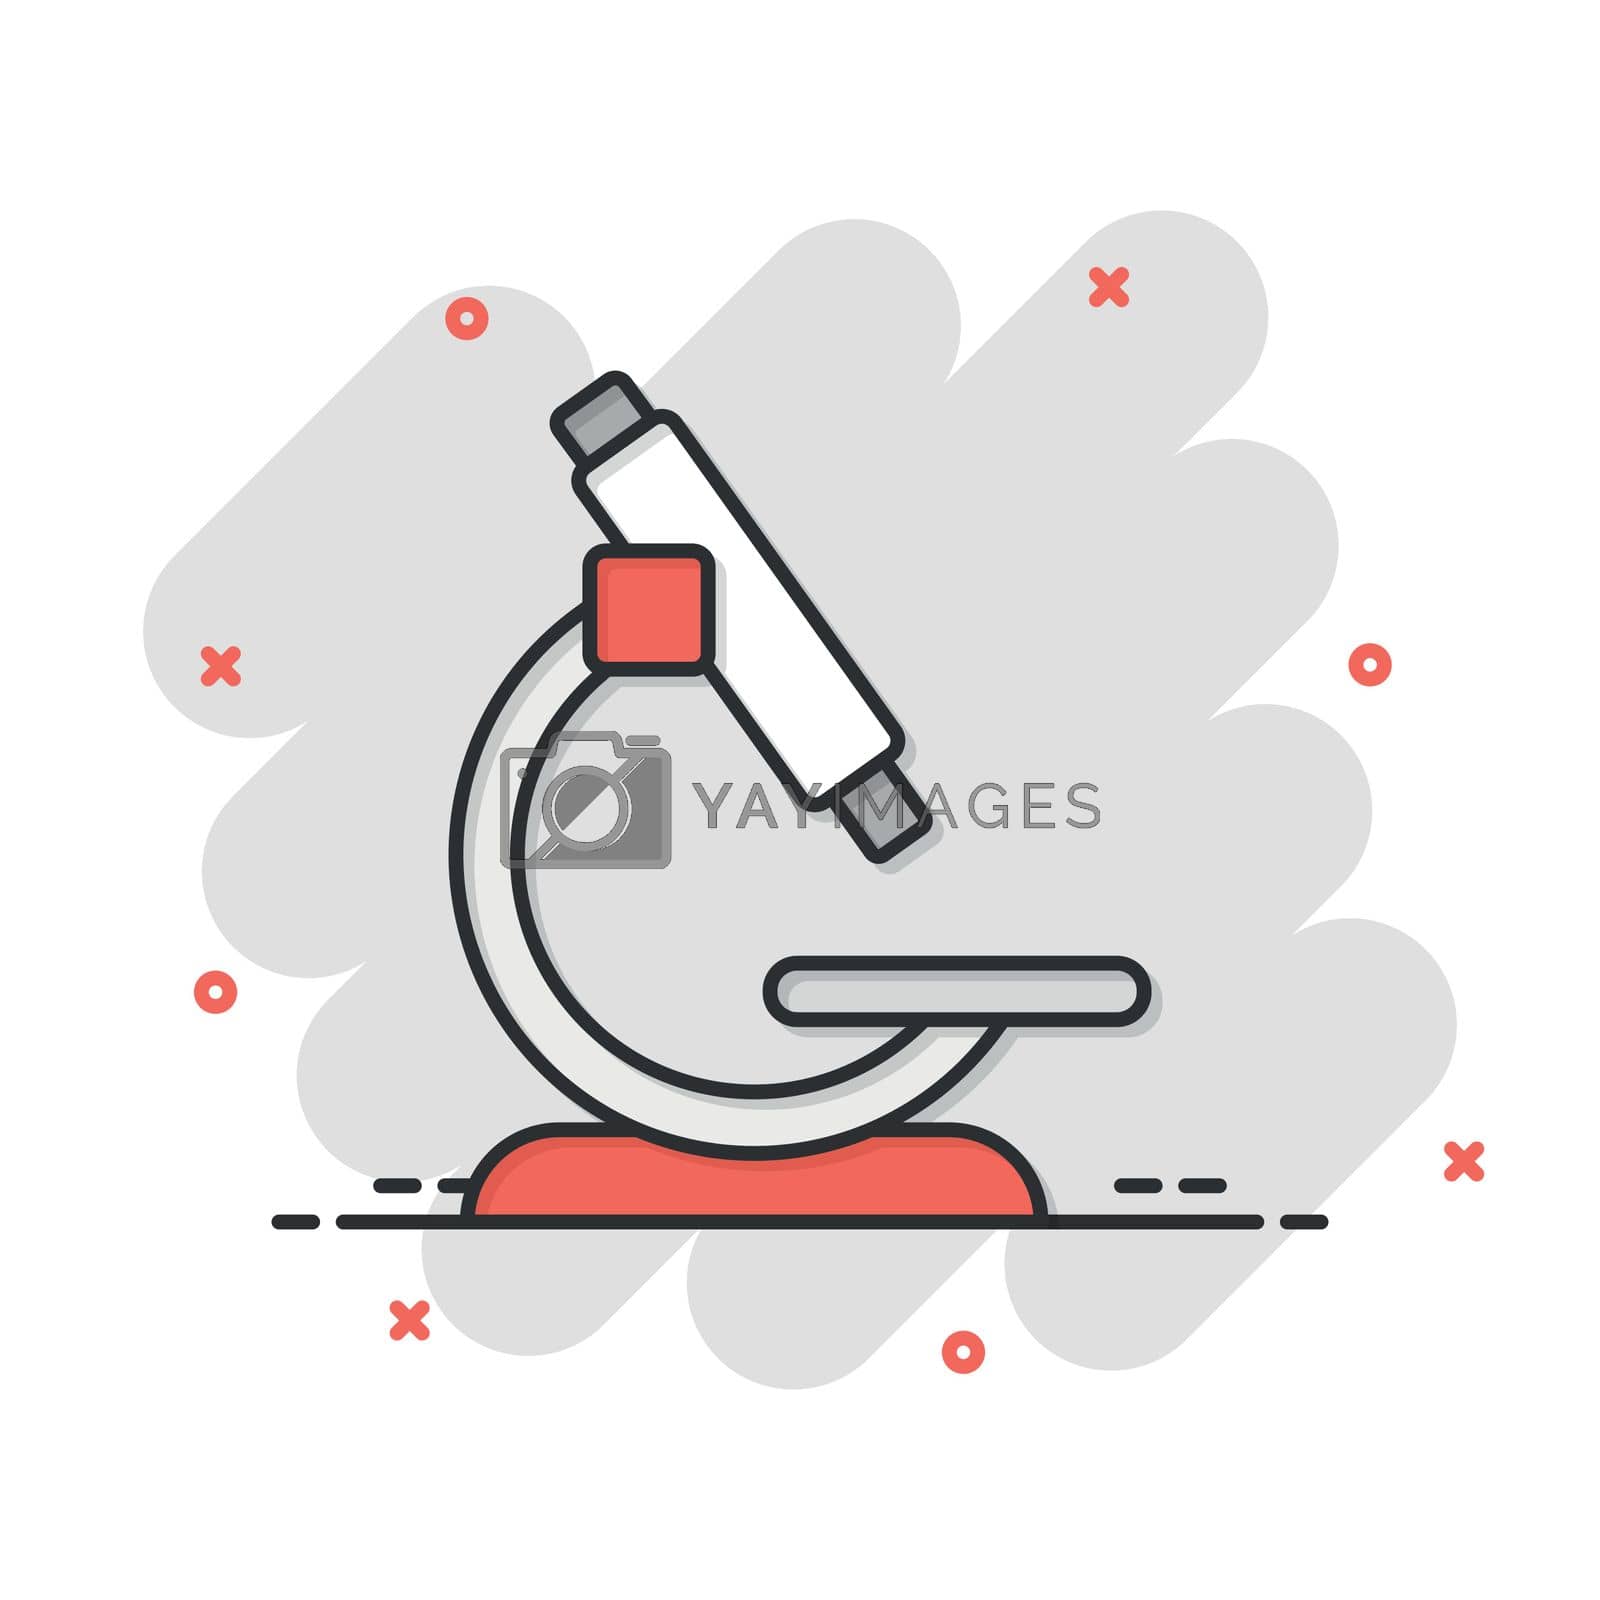 Royalty free image of Microscope icon in comic style. Laboratory magnifier cartoon vector illustration on isolated background. Biology instrument splash effect sign business concept. by LysenkoA